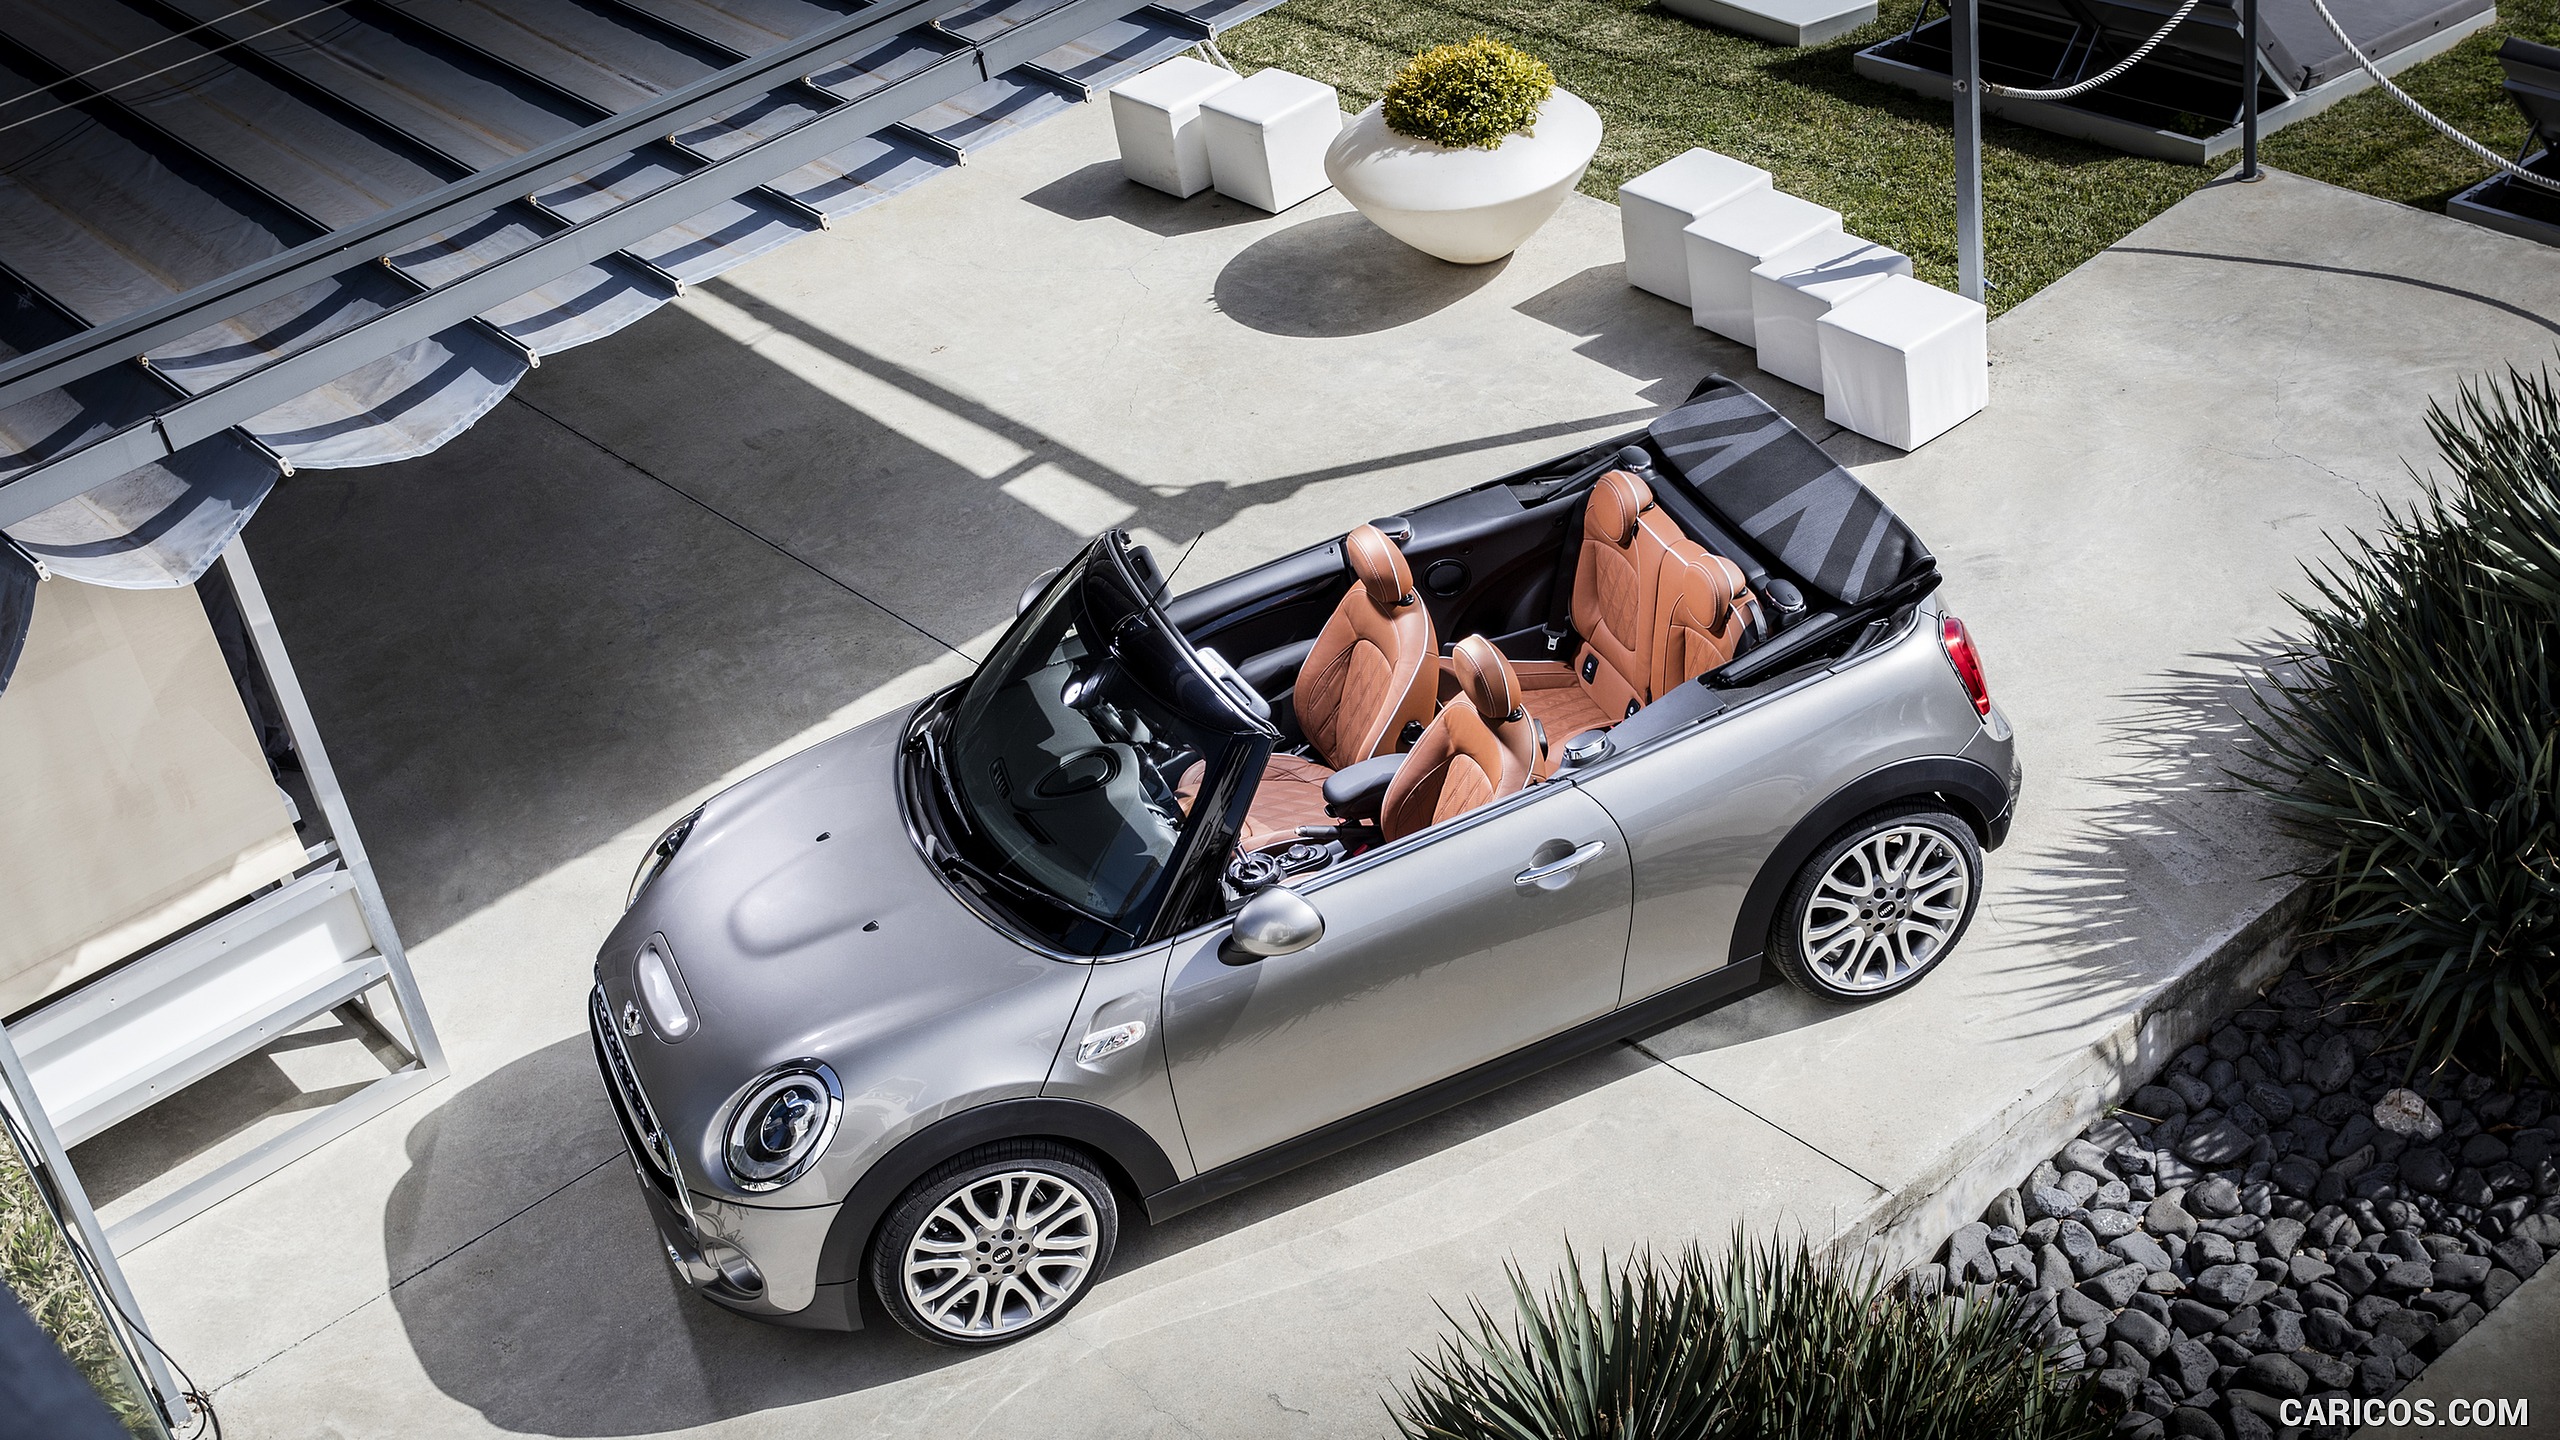 2016 MINI Convertible Open 150 Edition - Top, #1 of 15